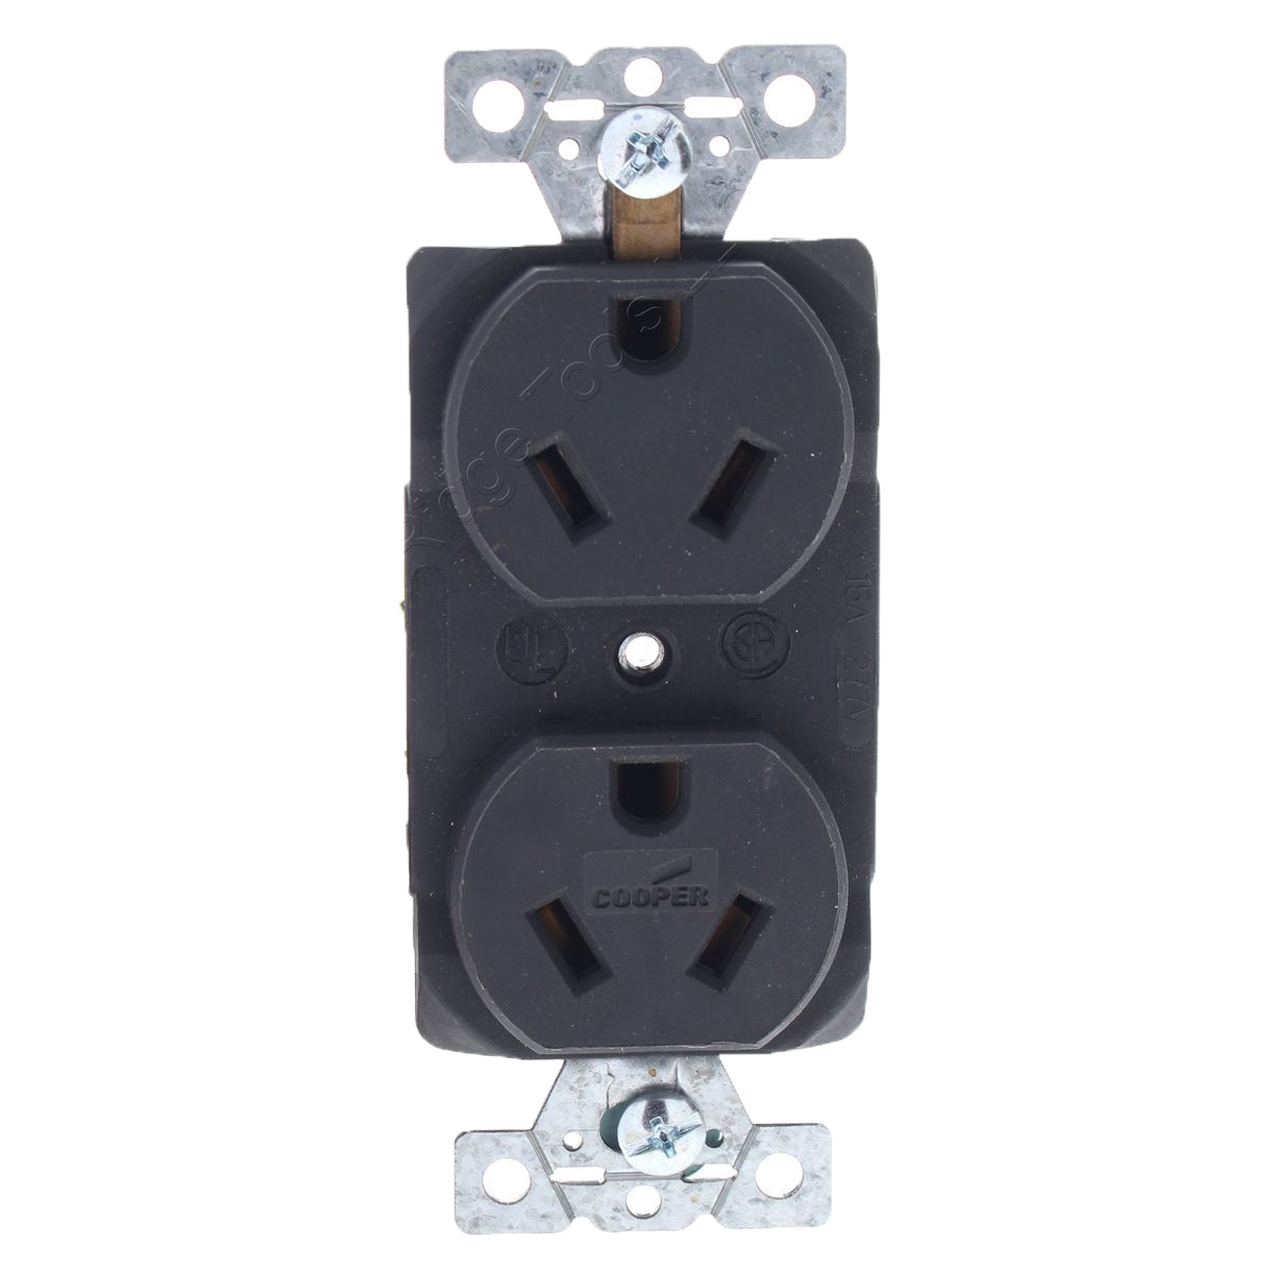 NEMA 7-15R Wall Outlet